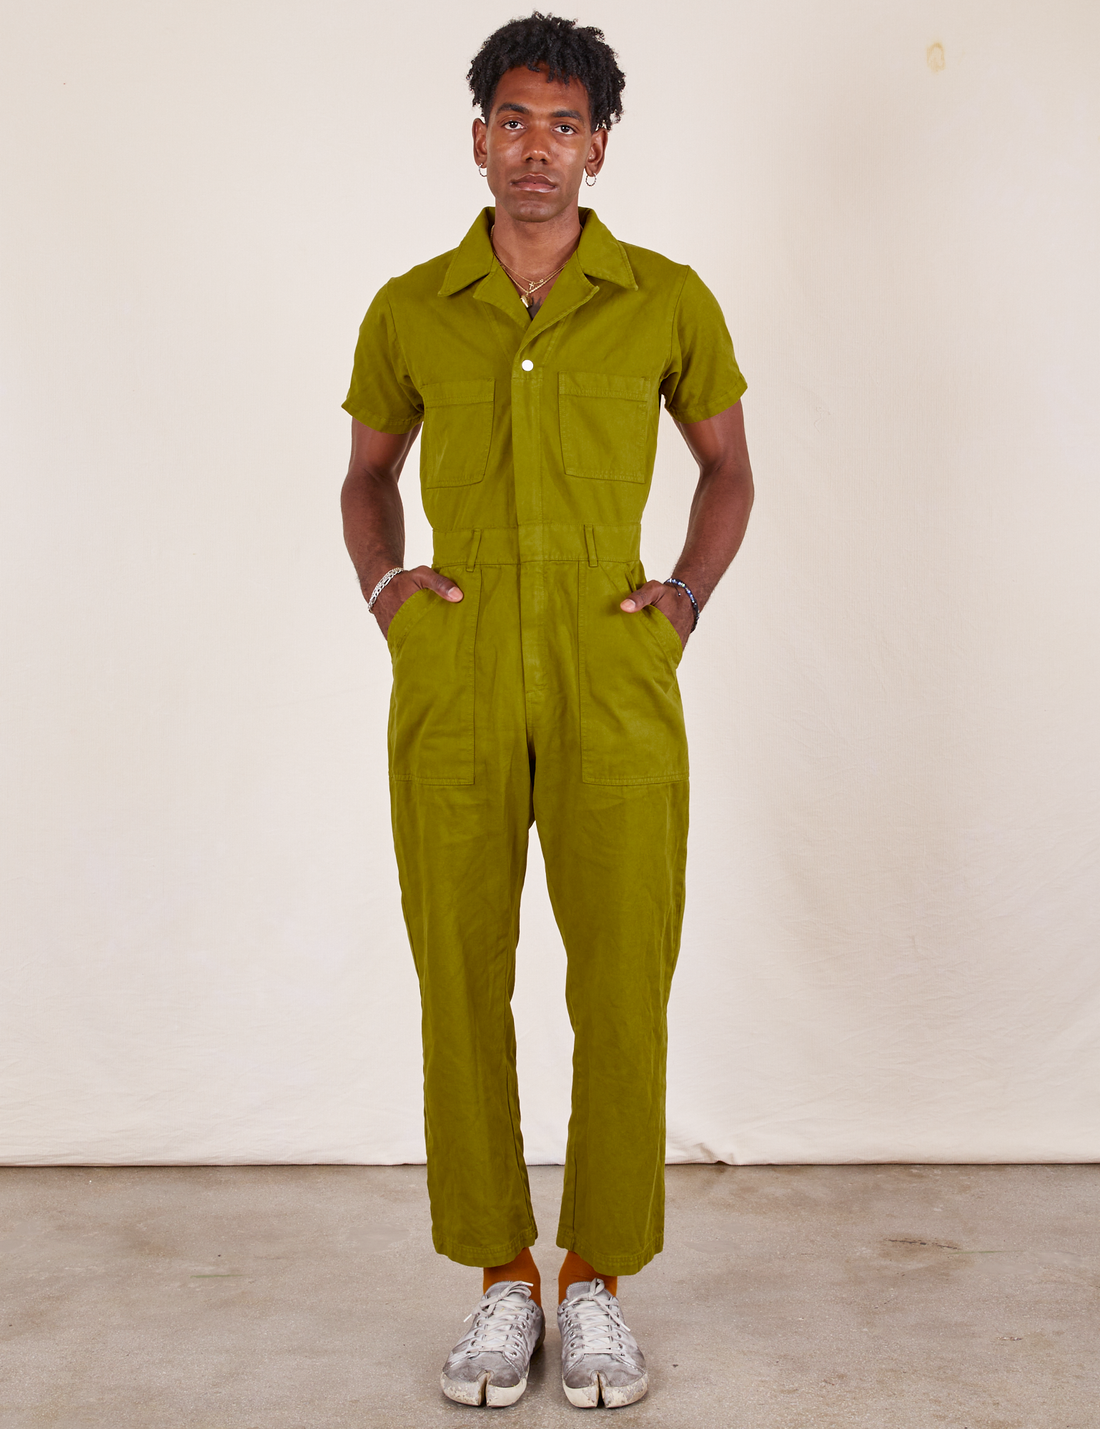 Jerrod is 6'3" and wearing L Short Sleeve Jumpsuit in Olive Green